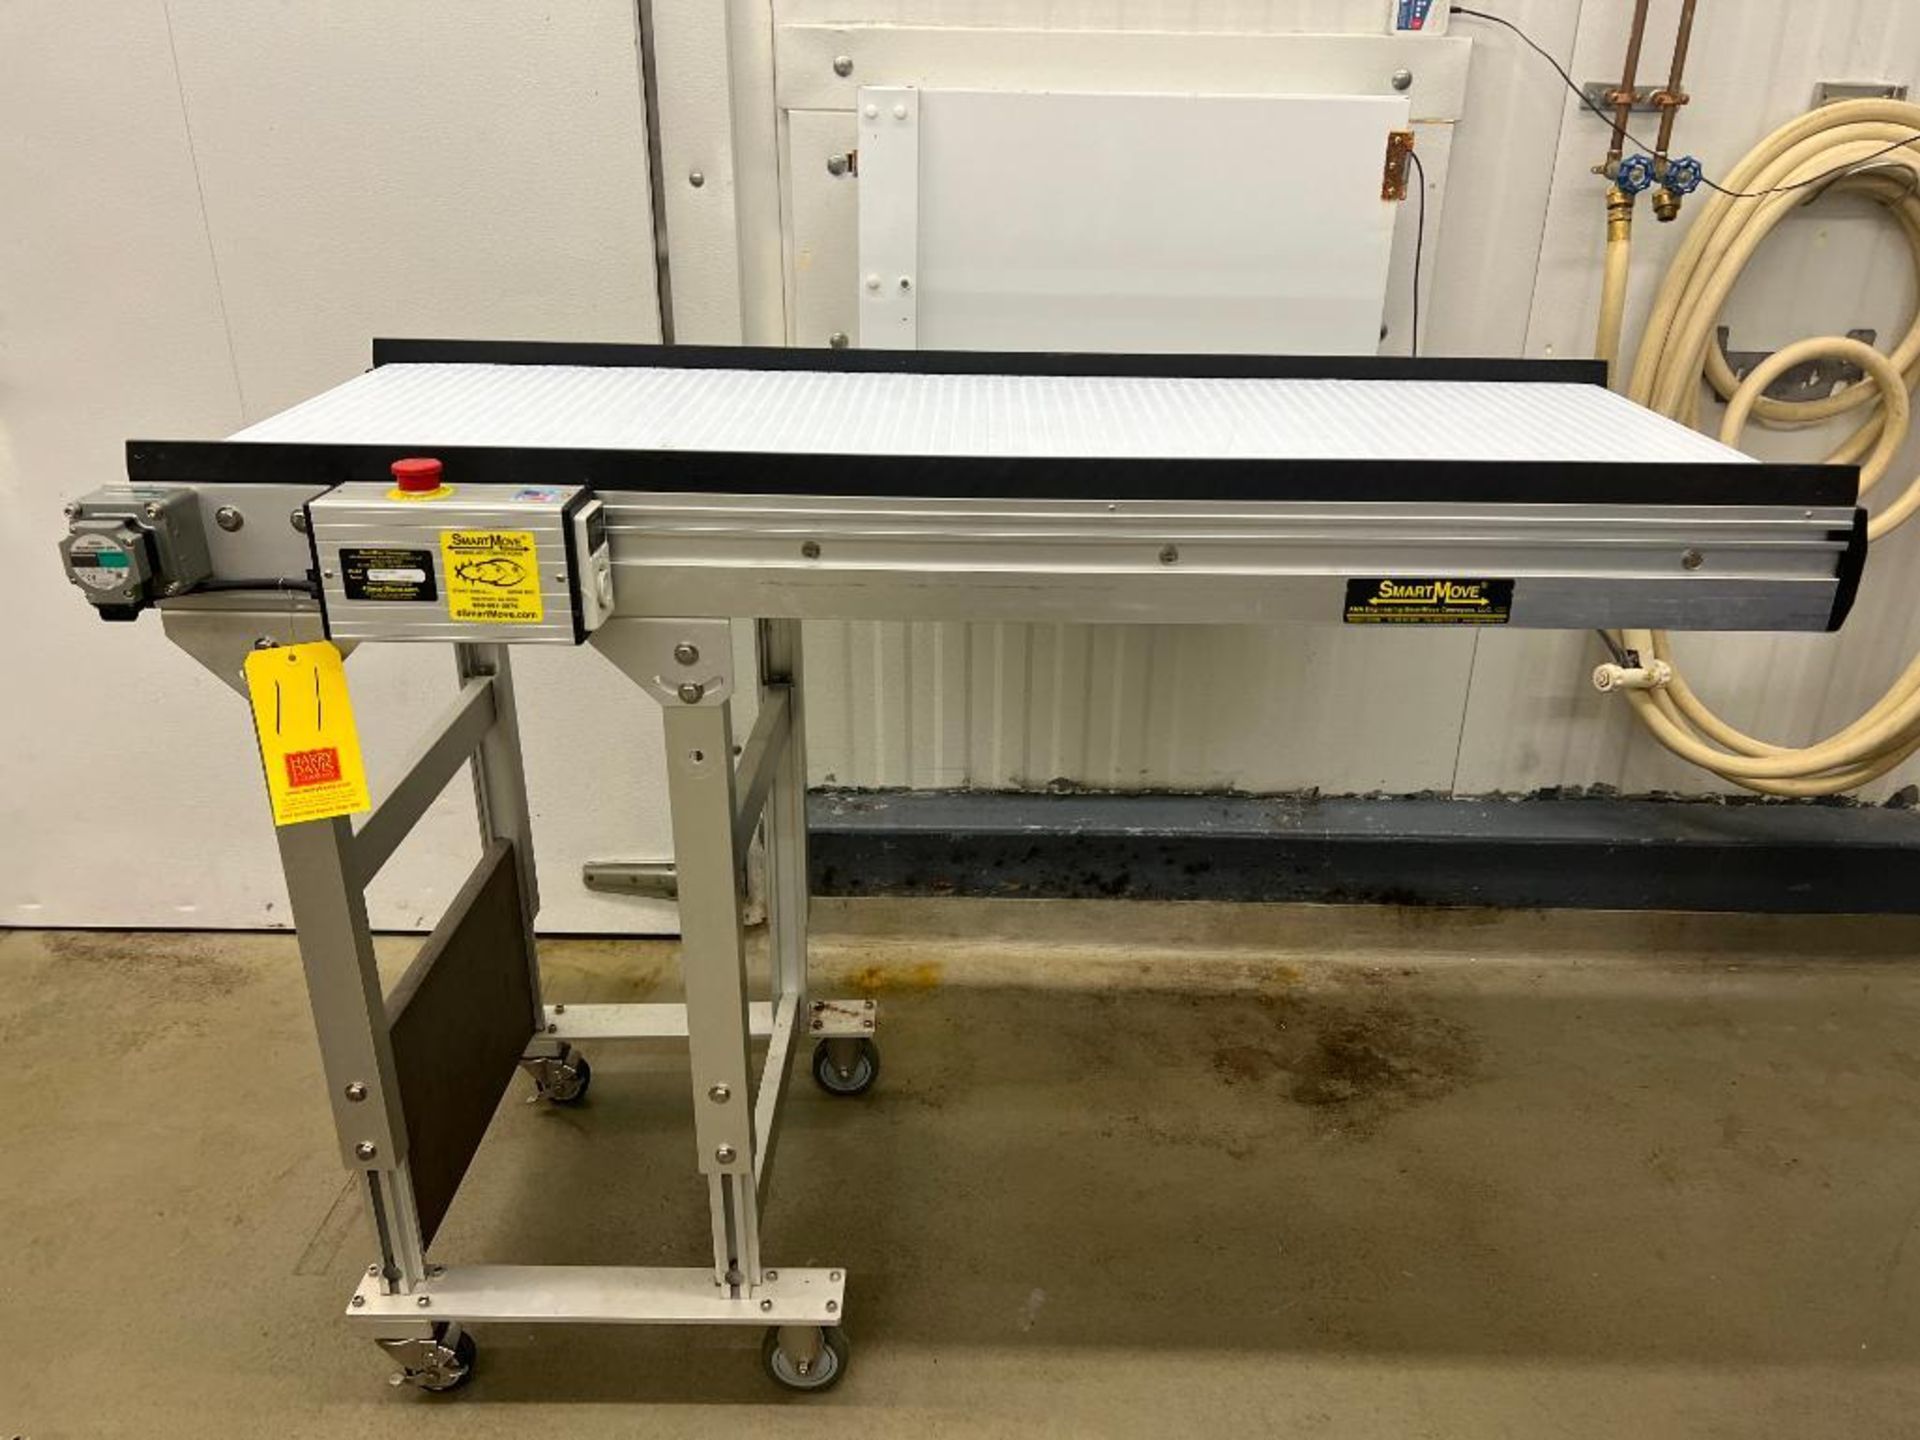 2020 SmartMove 59" x 21" S/S Framed Conveyor, Model: DX6-050-21-8505, S/N: 7201-1 with Integrated